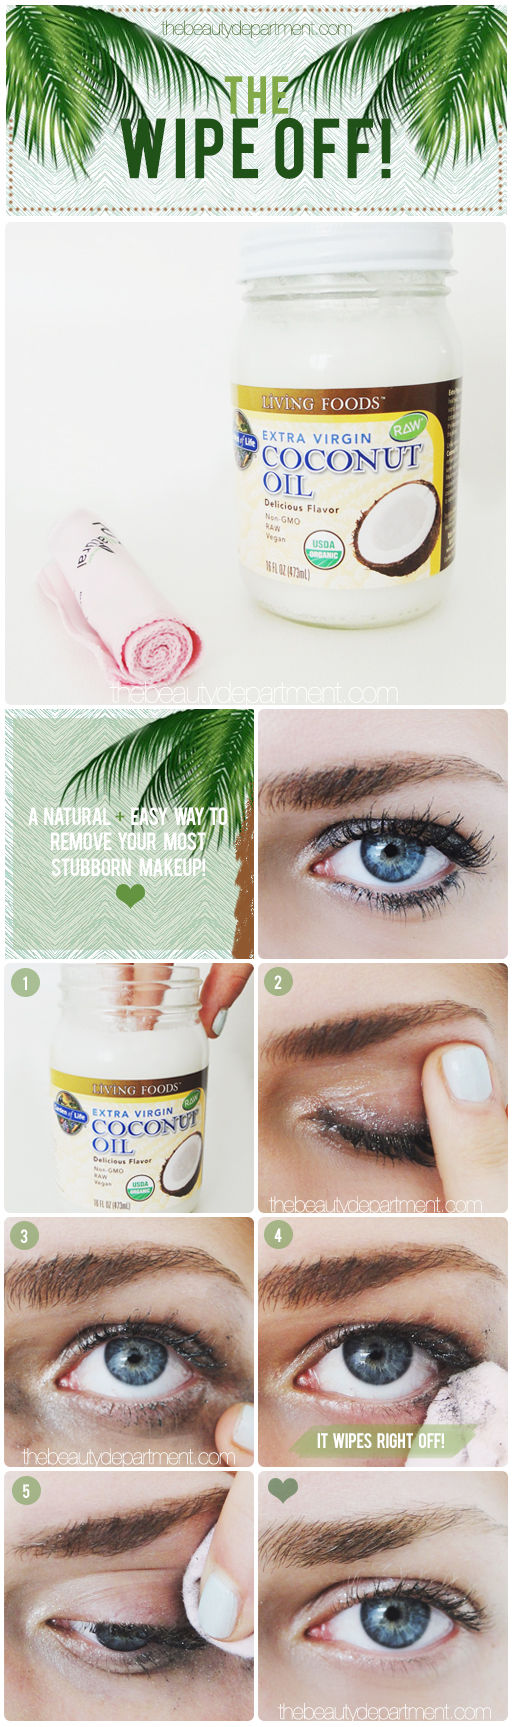 8 Beauty Uses Of Coconut Oil